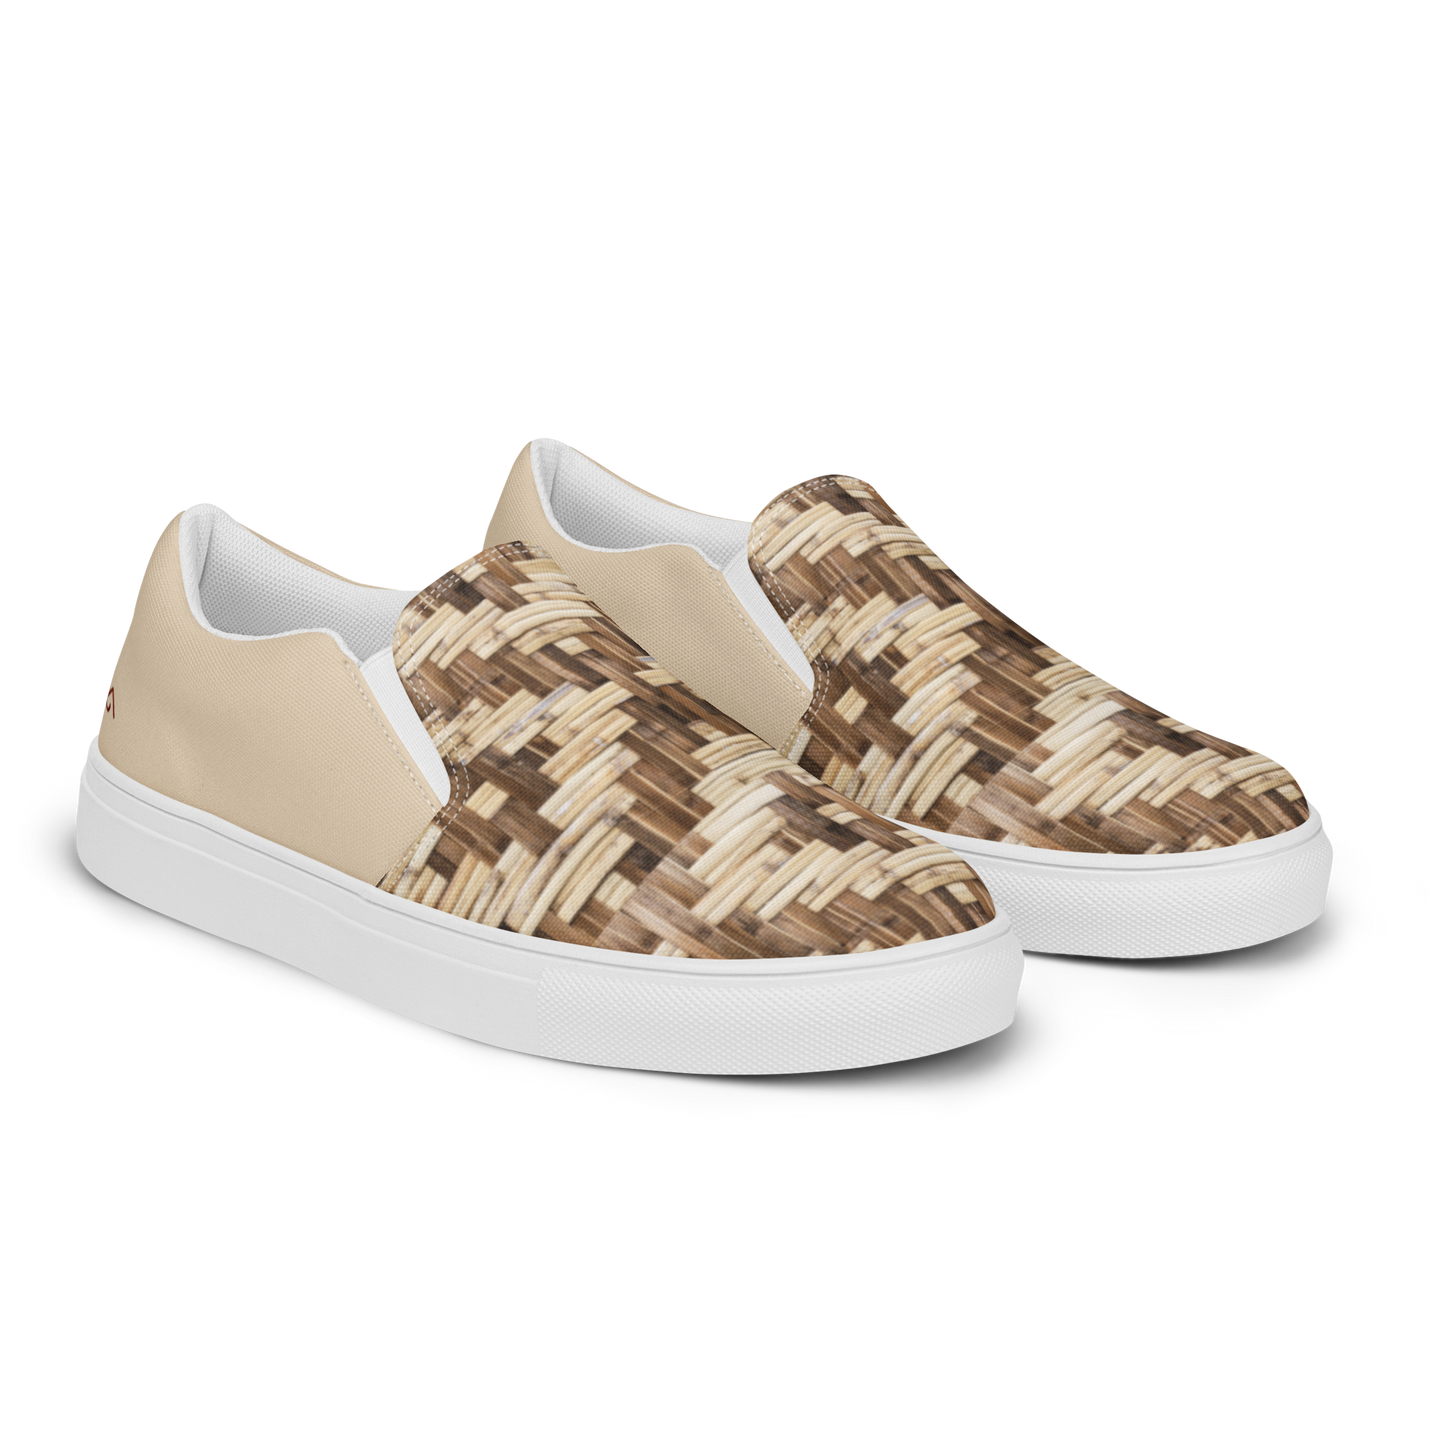 Women’s Bamboo slip-on canvas shoes